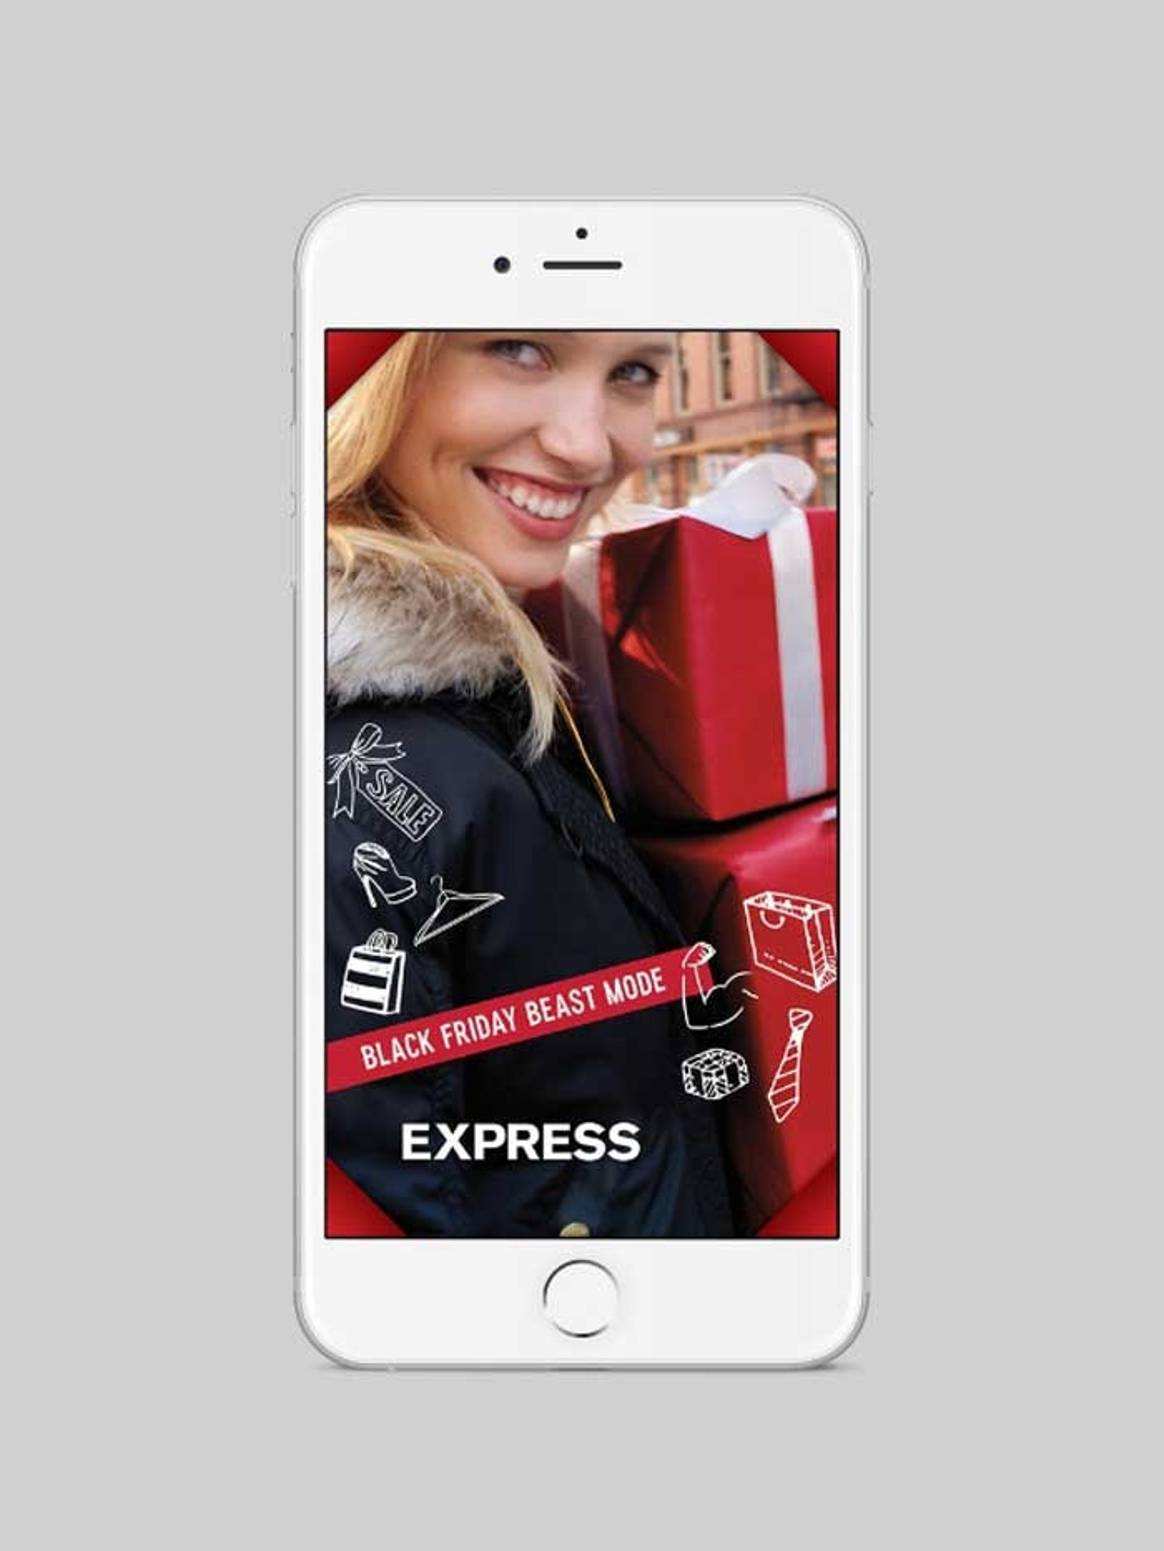 Express approaches Black Friday with social media strategy